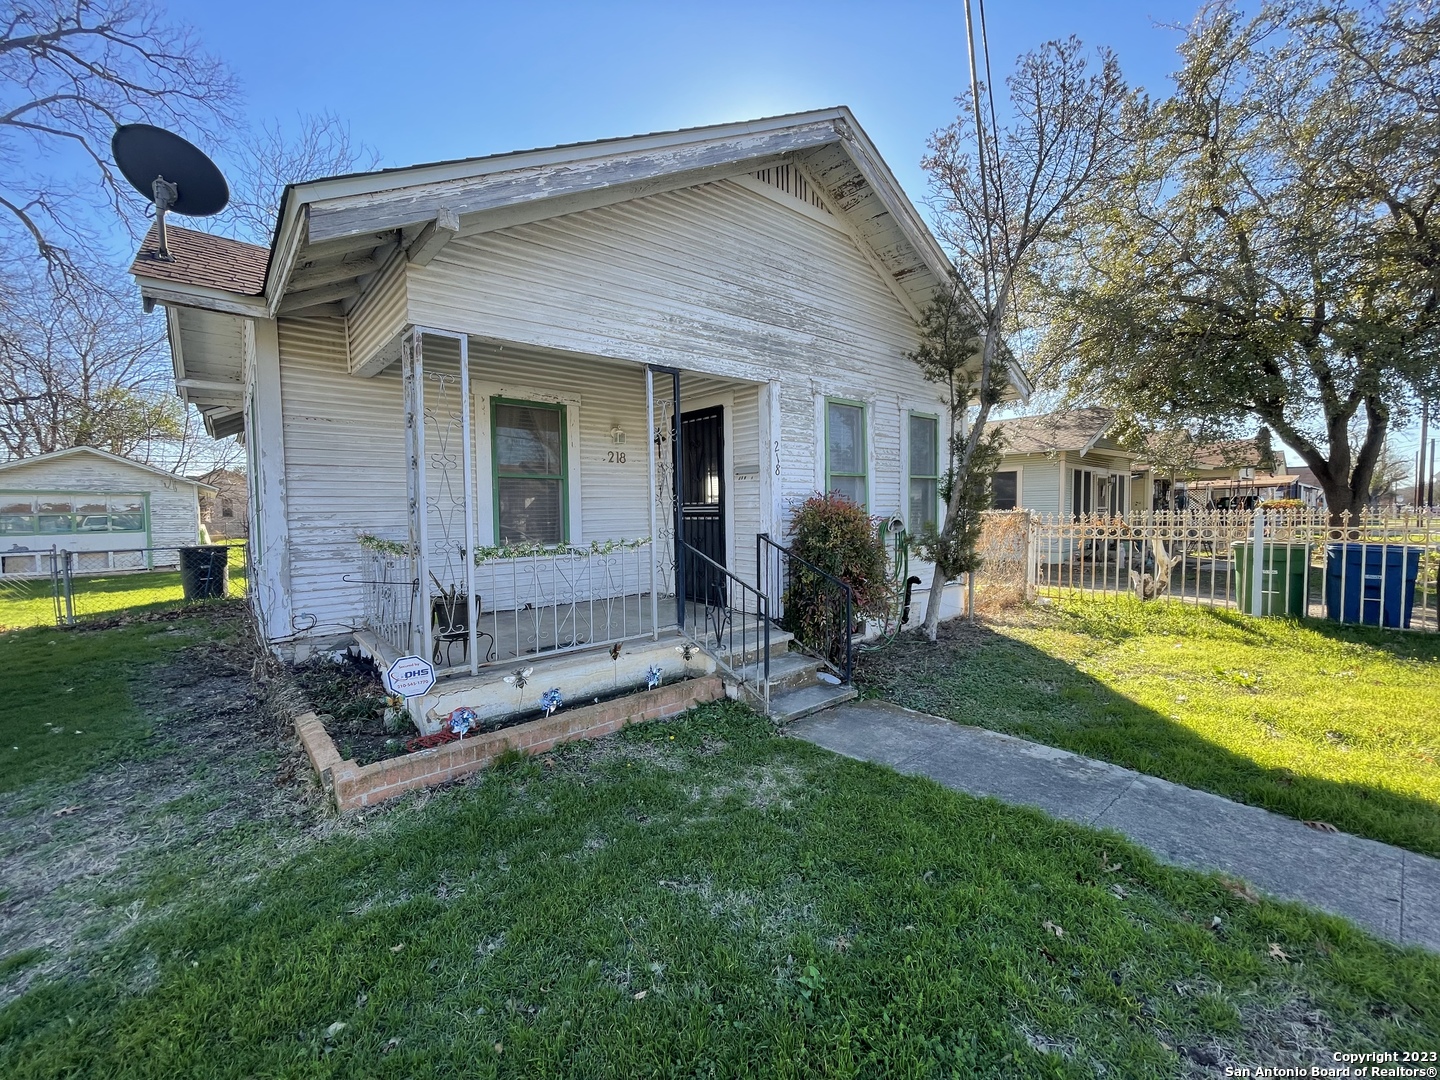 Spacious 2 bedroom 1 bath one single story home. Home welcomes you to a huge living room area. Kitchen is separated and has plenty of cabinet space. Yard has a storage shed and mature trees. Must see!